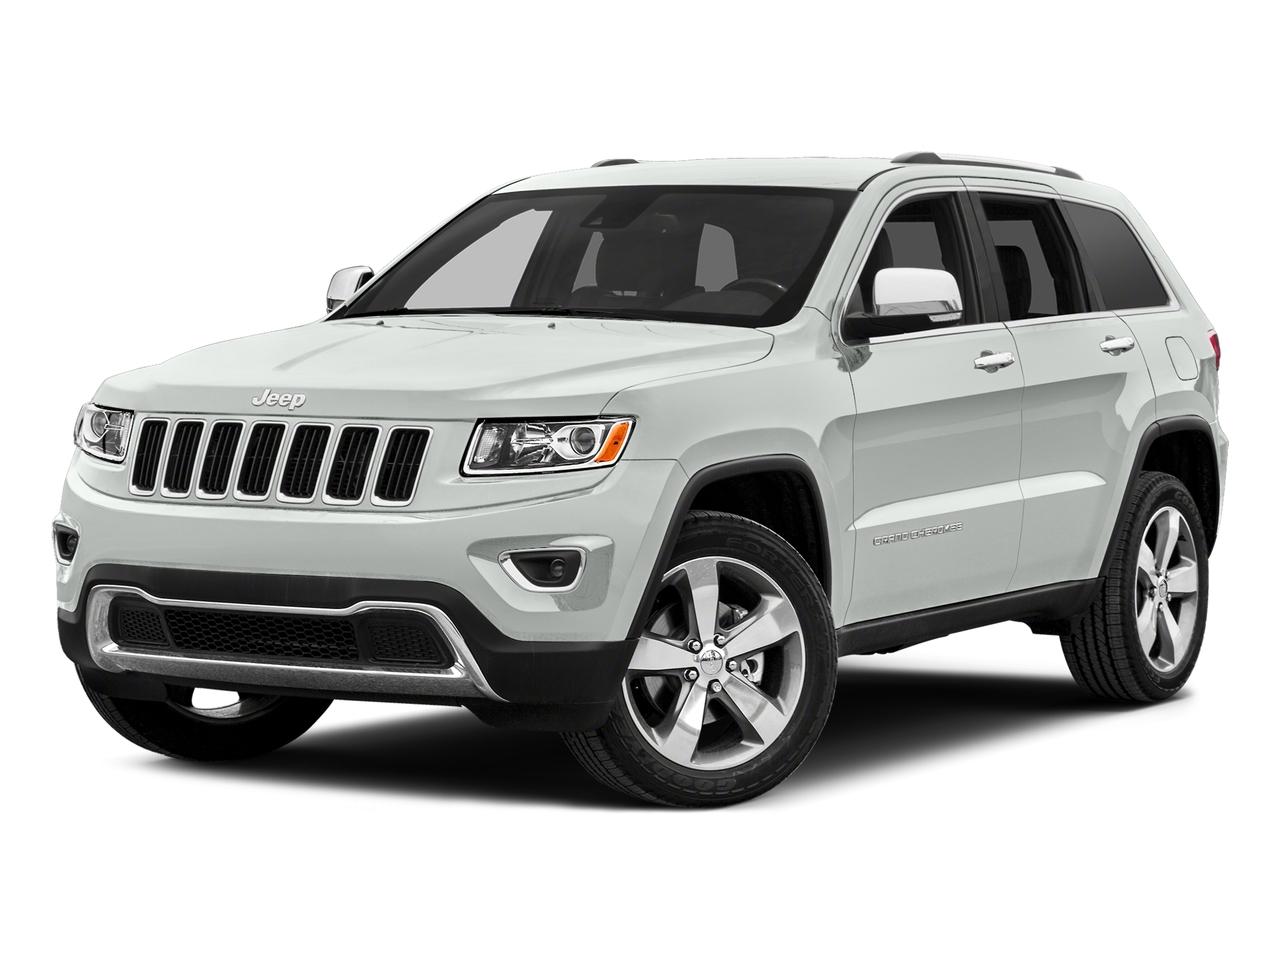 2015 Jeep Grand Cherokee Vehicle Photo in Forest Park, IL 60130